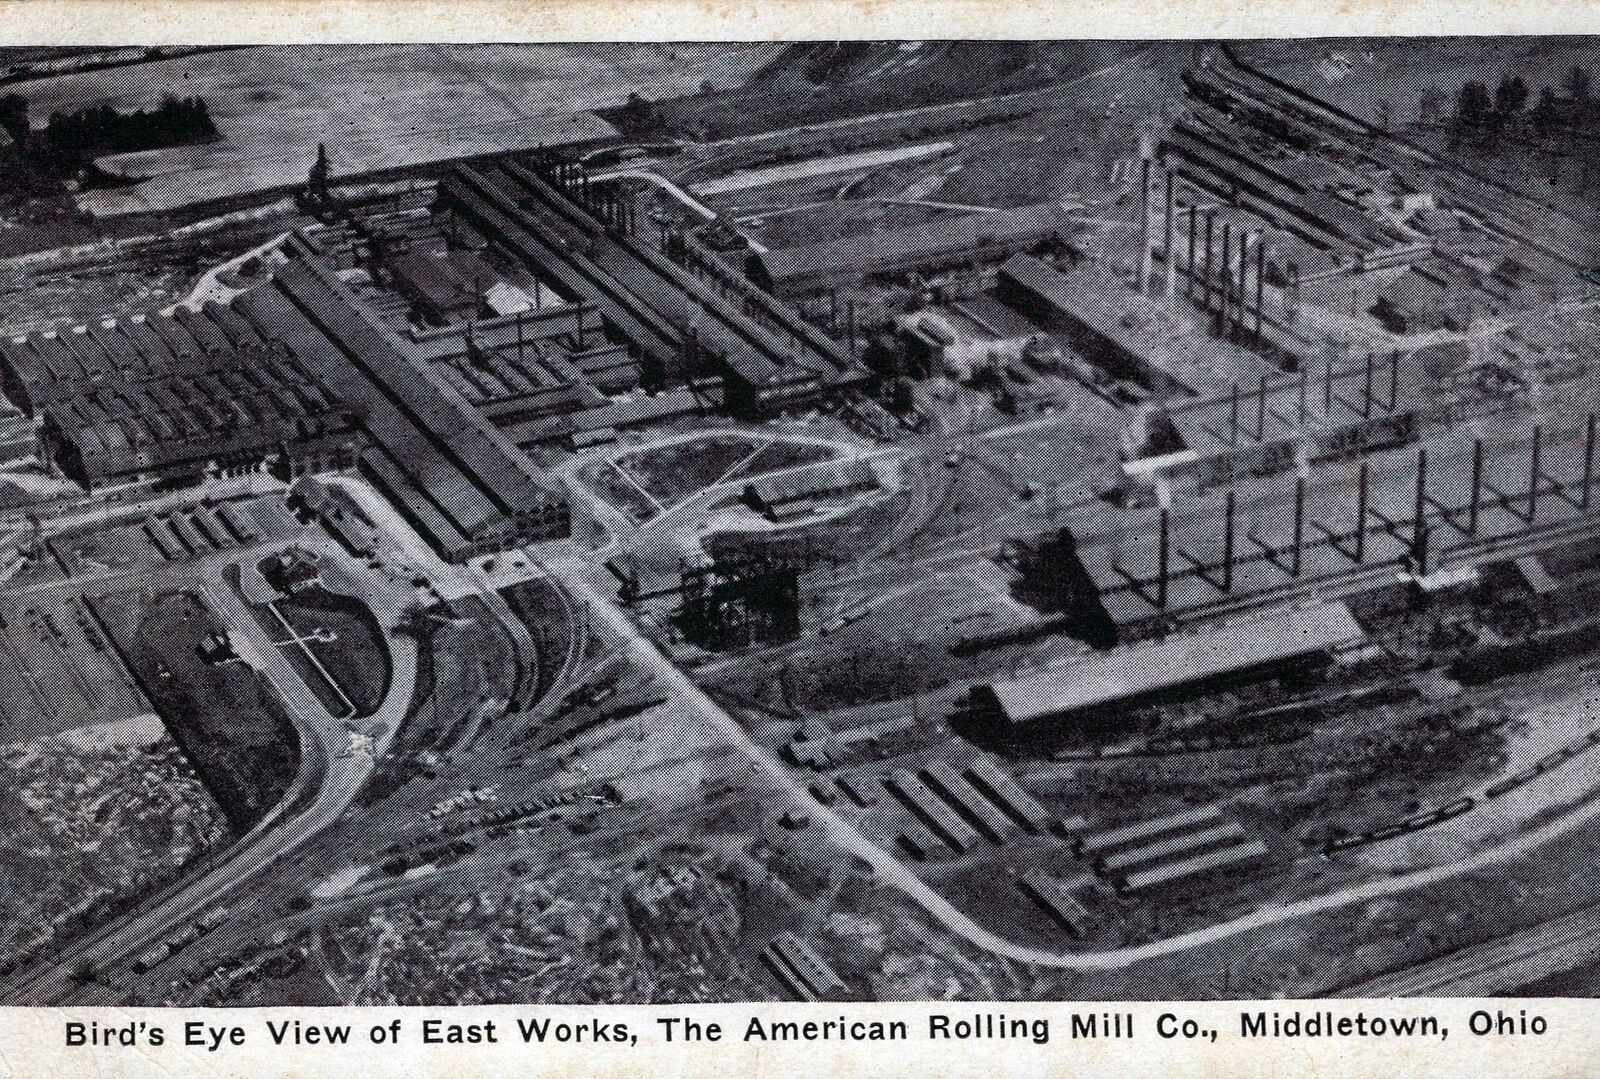 MIDDLETOWN OH - The American Rolling Mill Co. East Works Birdseye View Postcard